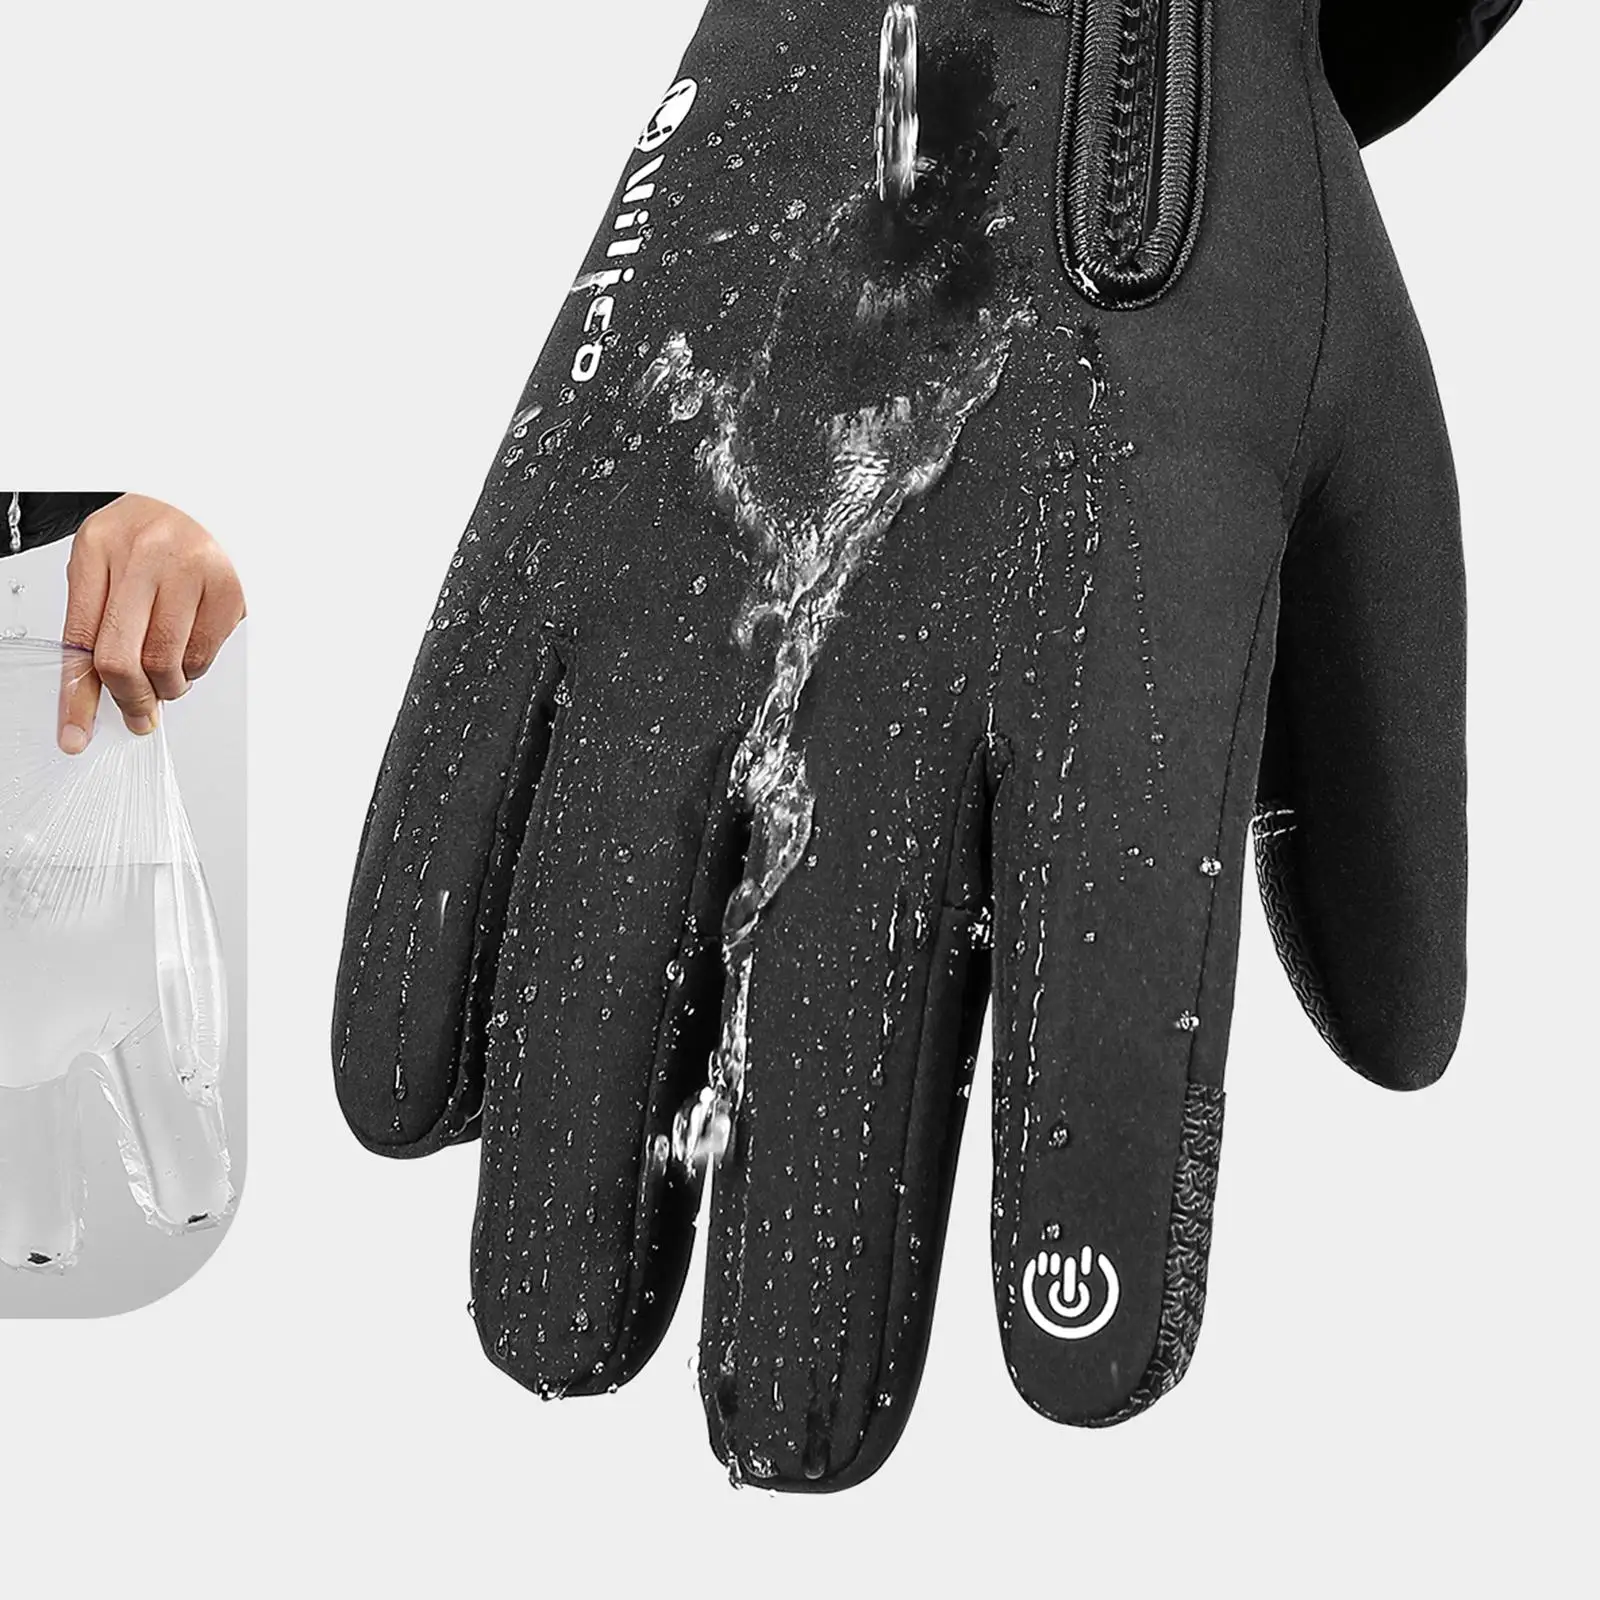 Warm Gloves Motorcycling Gloves Touch Screen, Portable Comfortable Winter Gloves